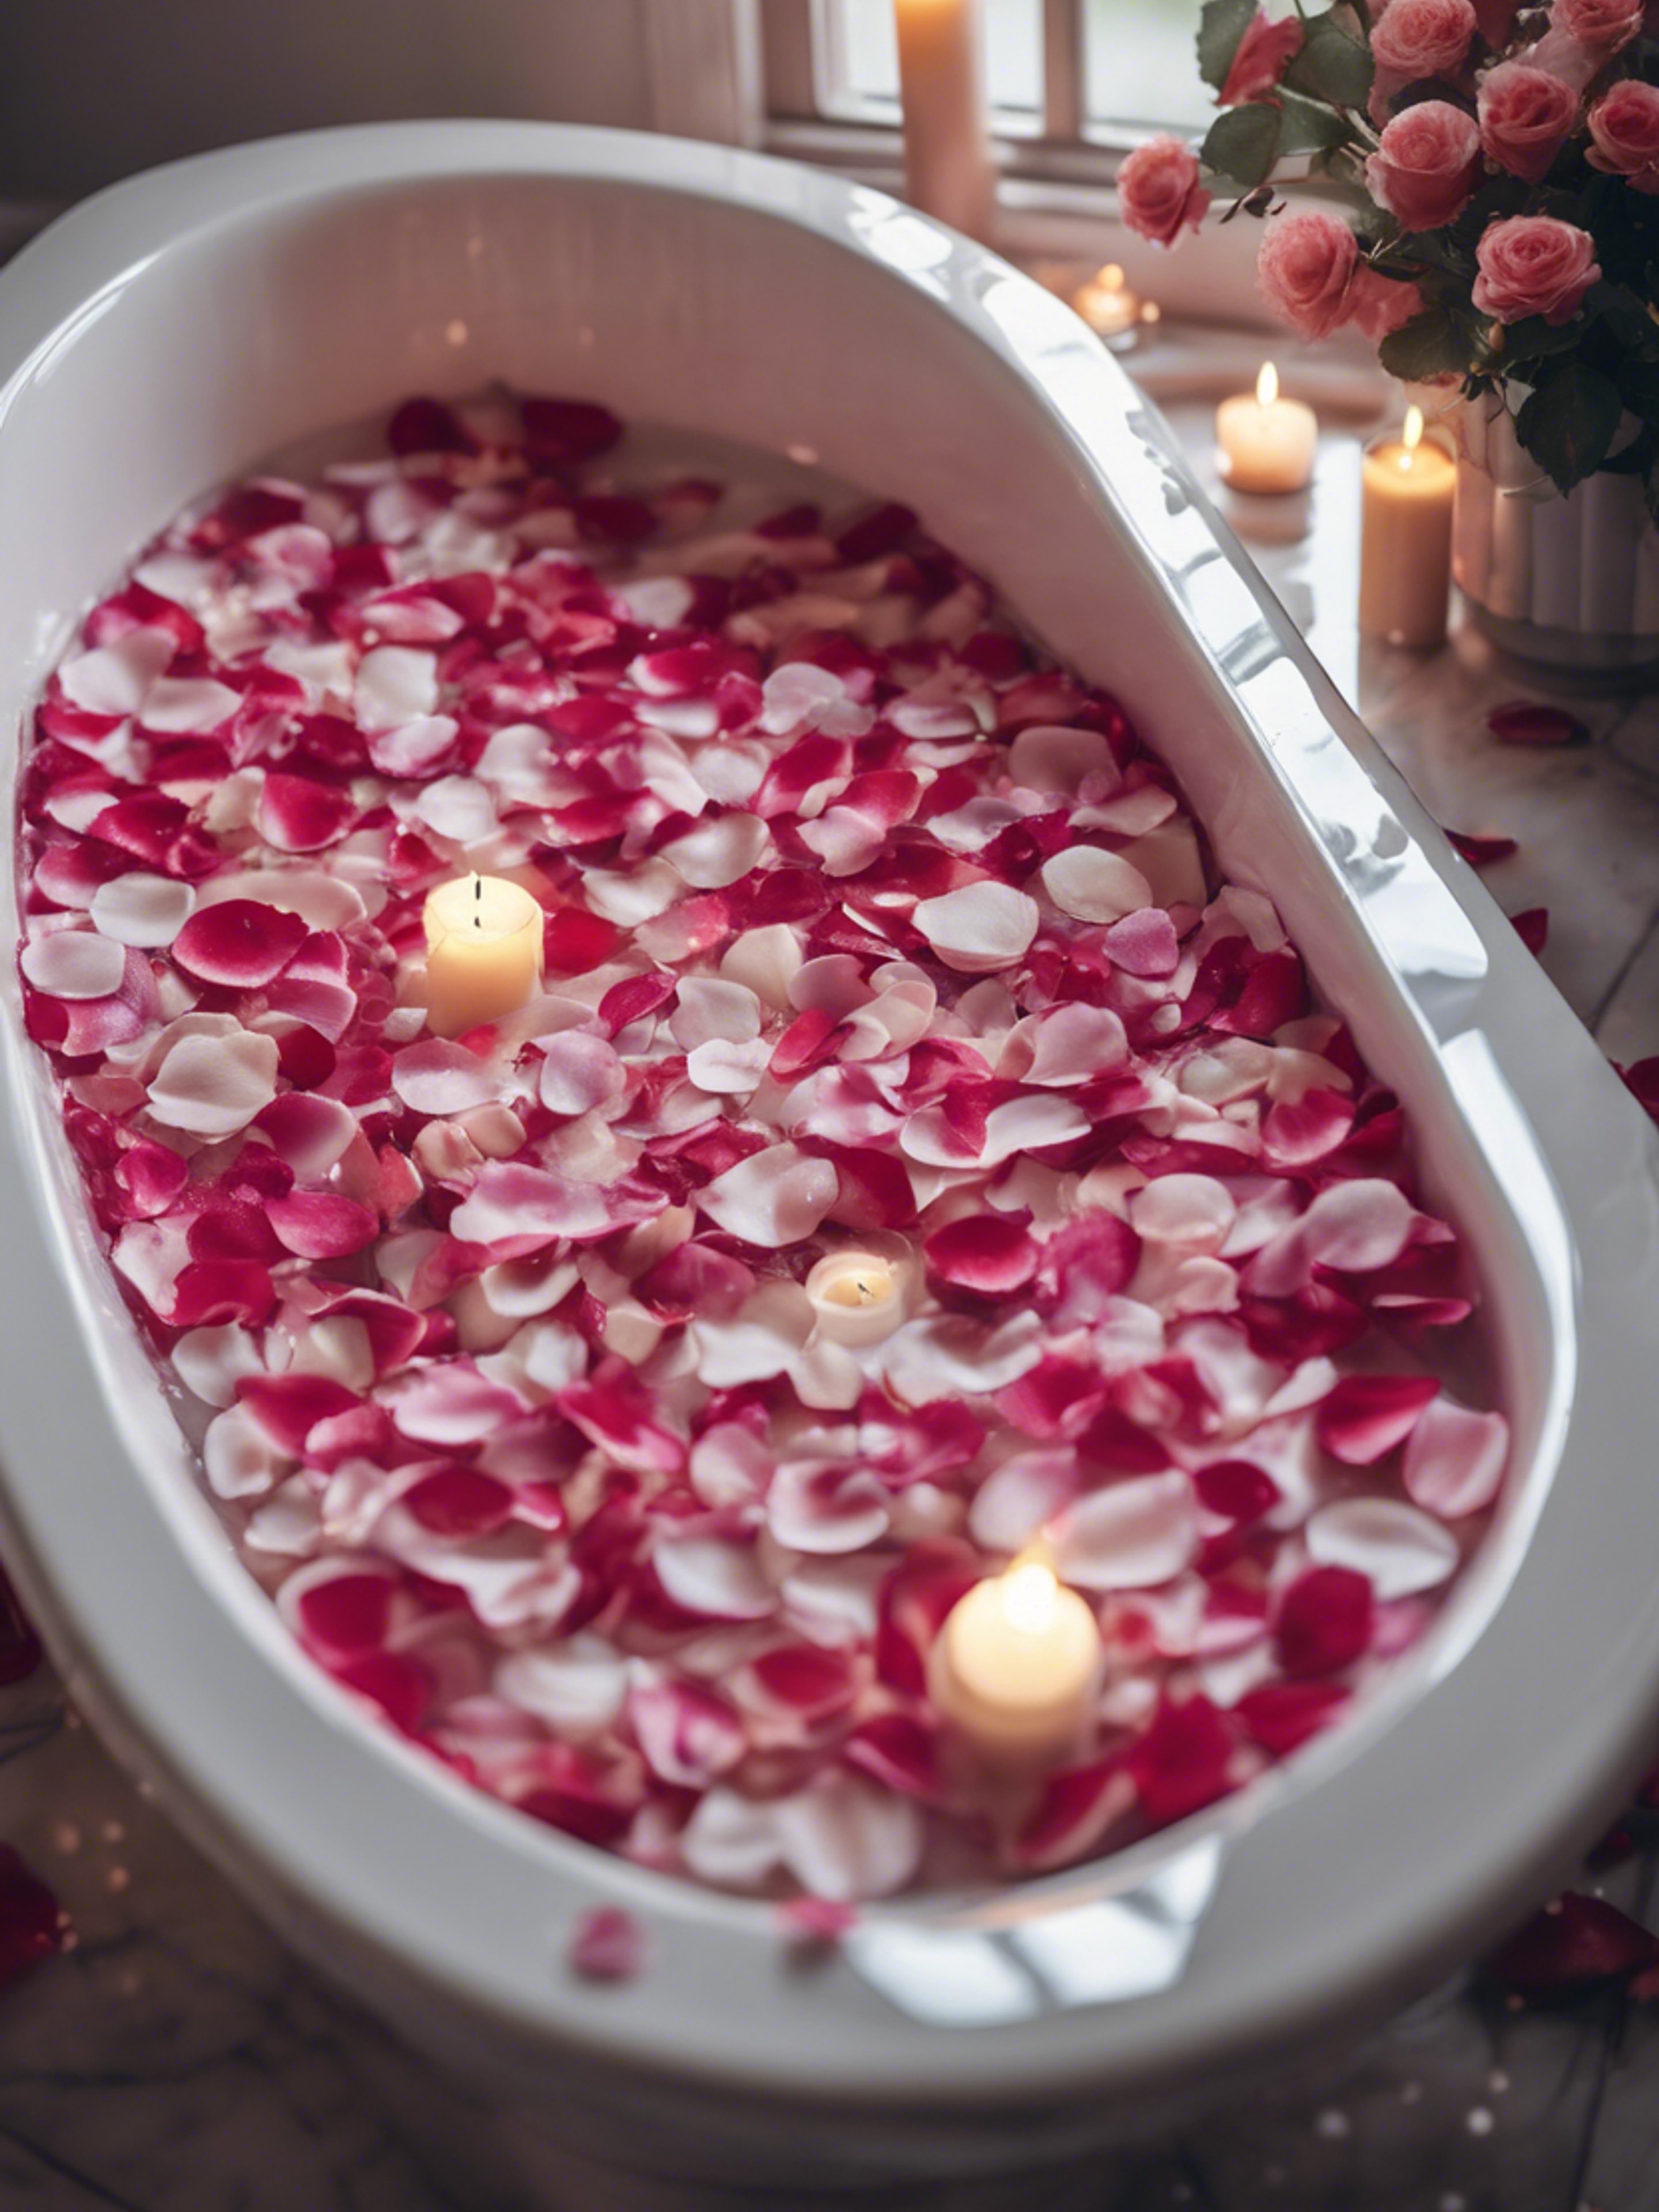 An inviting bubble bath in a white tub with rose petals and candles around the edge of the tub. ផ្ទាំង​រូបភាព[29454076f2ac4acb9df8]